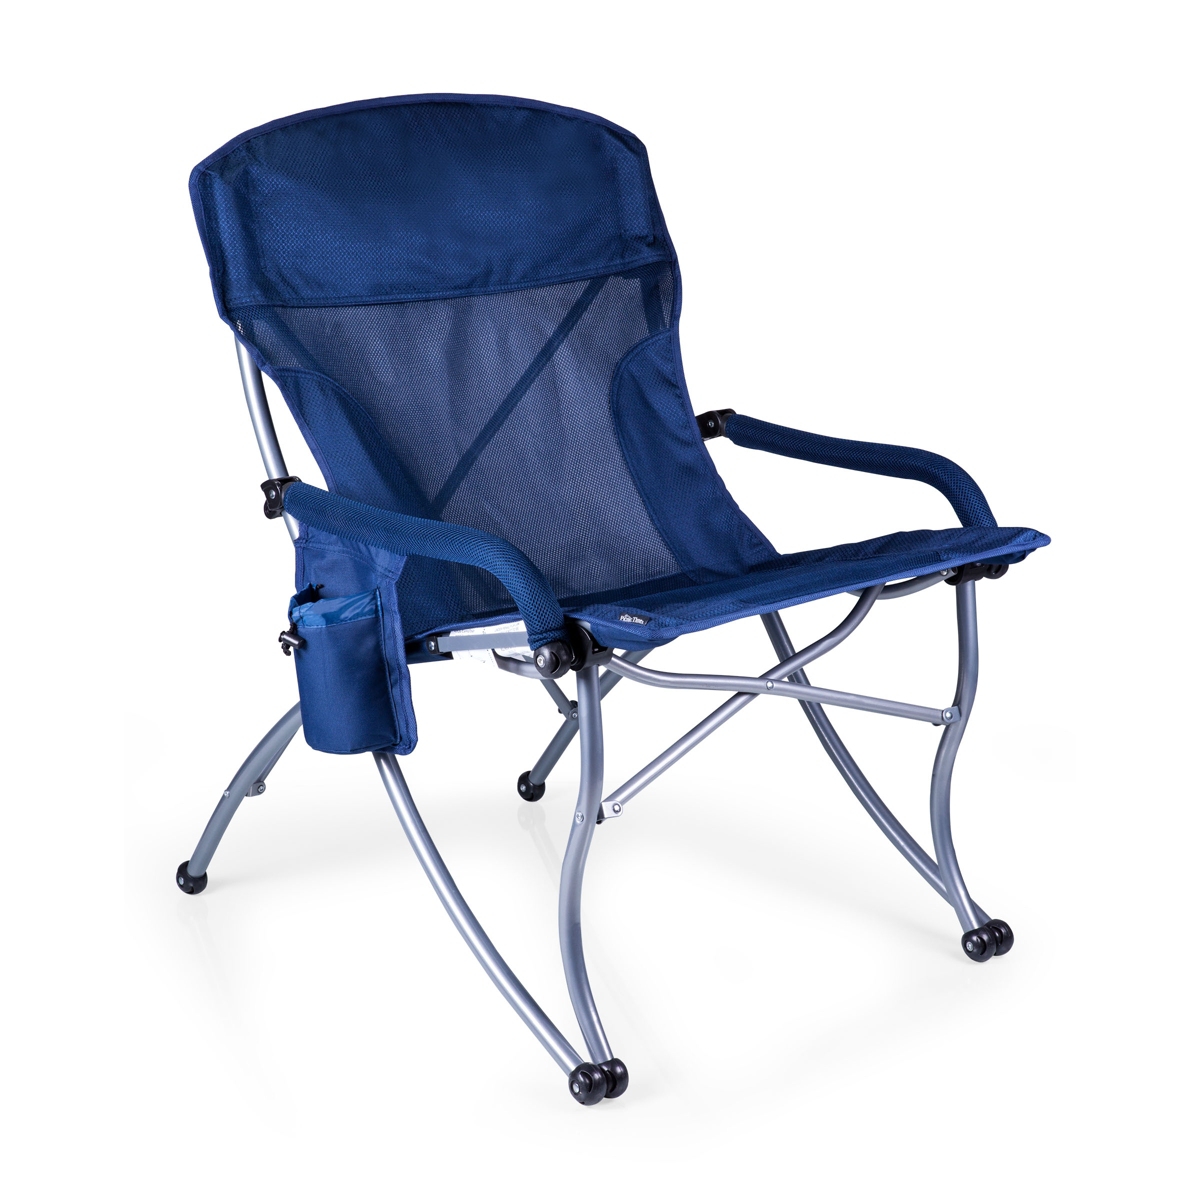 by Picnic Time Navy Pt-xl Camp Chair - Navy